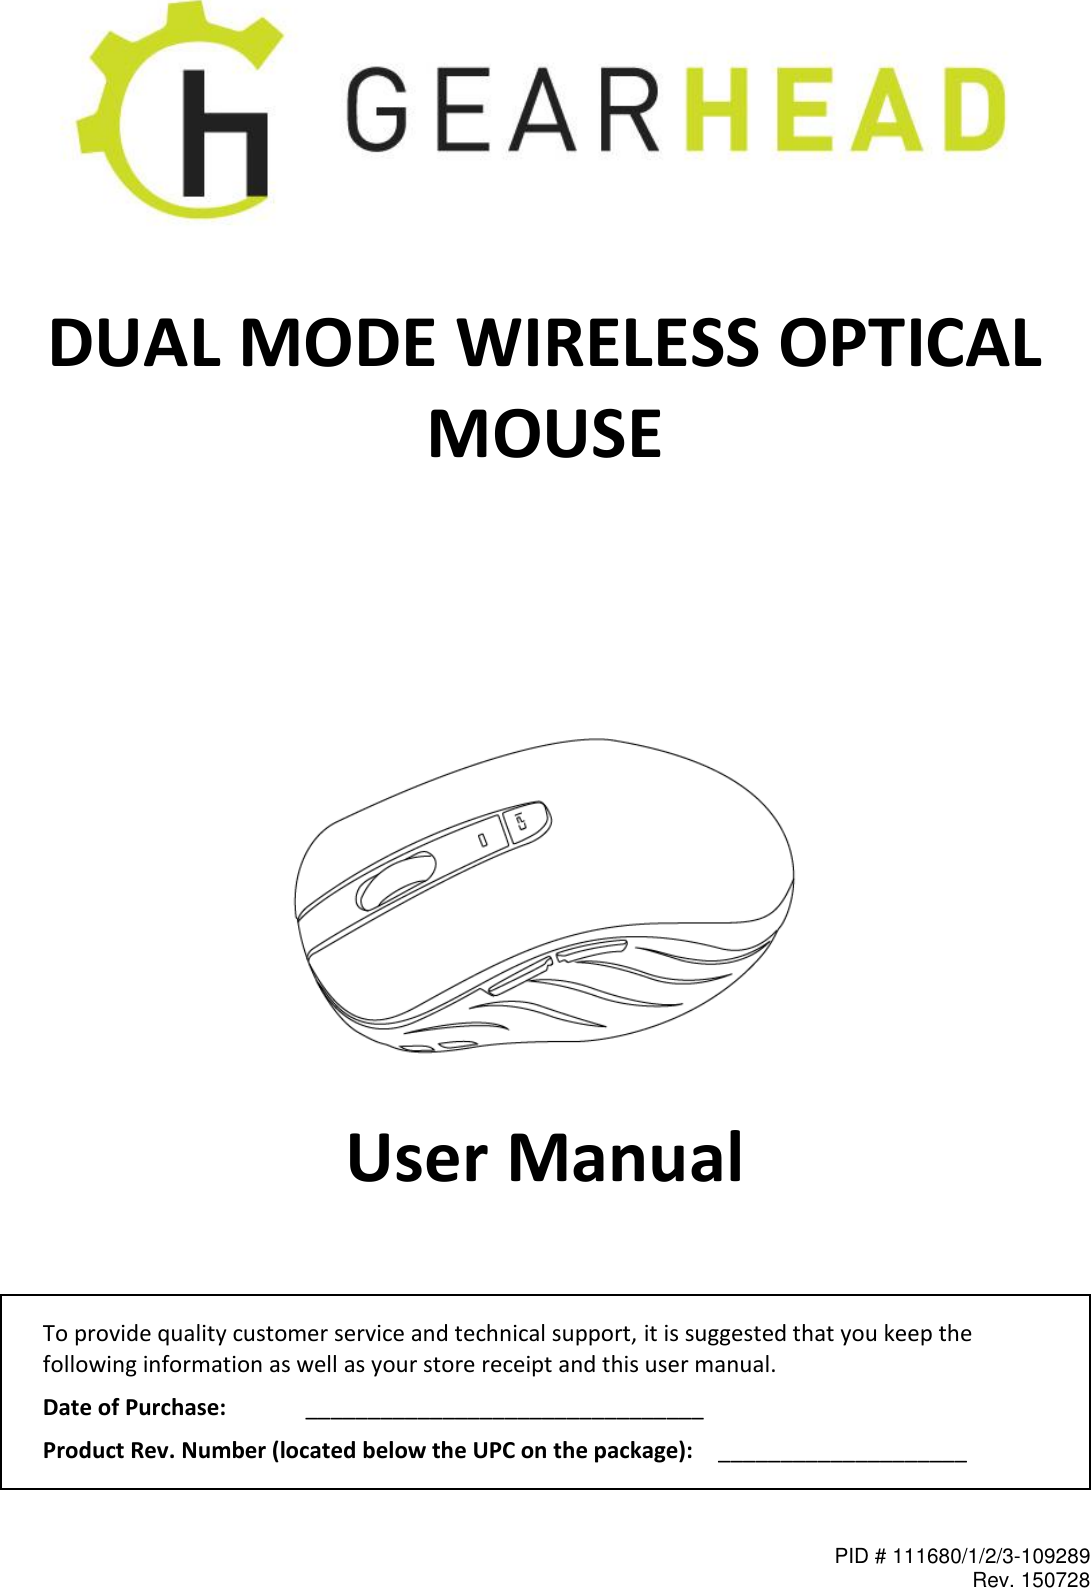 PID # 111680/1/2/3-109289 Rev. 150728    DUAL MODE WIRELESS OPTICAL MOUSE          User Manual  To provide quality customer service and technical support, it is suggested that you keep the following information as well as your store receipt and this user manual. Date of Purchase:   ________________________________ Product Rev. Number (located below the UPC on the package):   ____________________  